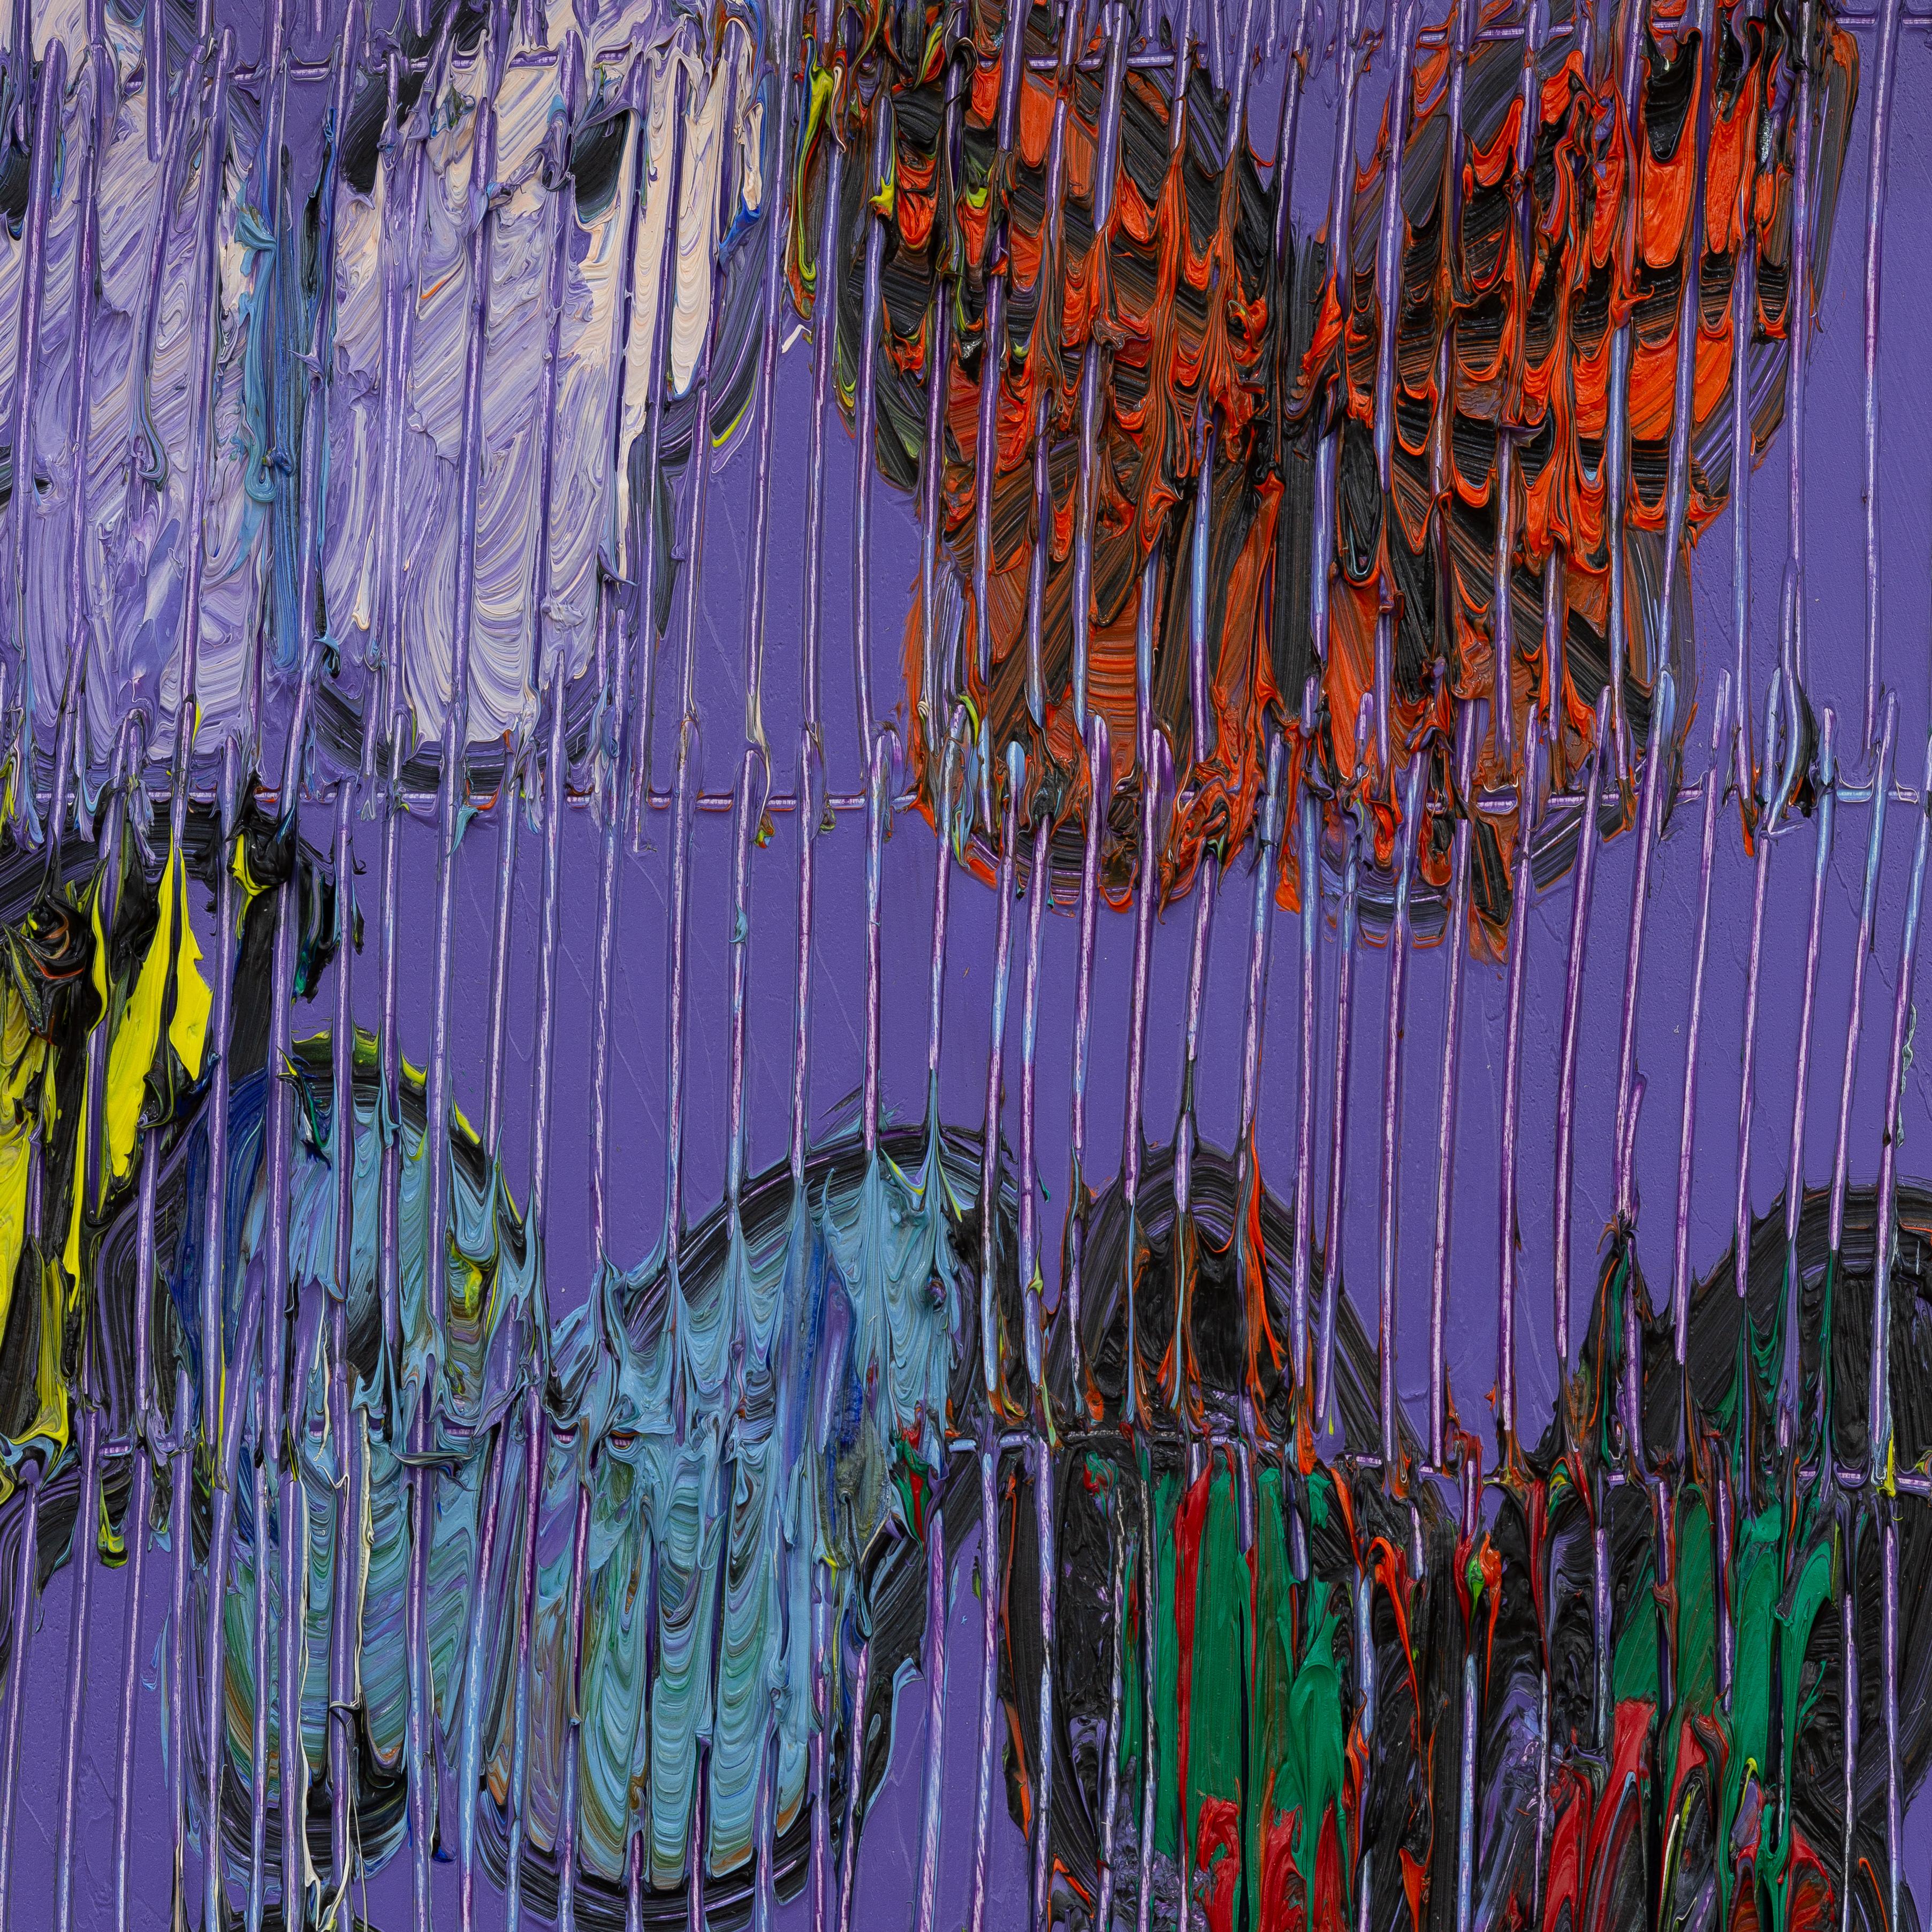 Purple Wisteria Courds - Neo-Expressionist Painting by Hunt Slonem